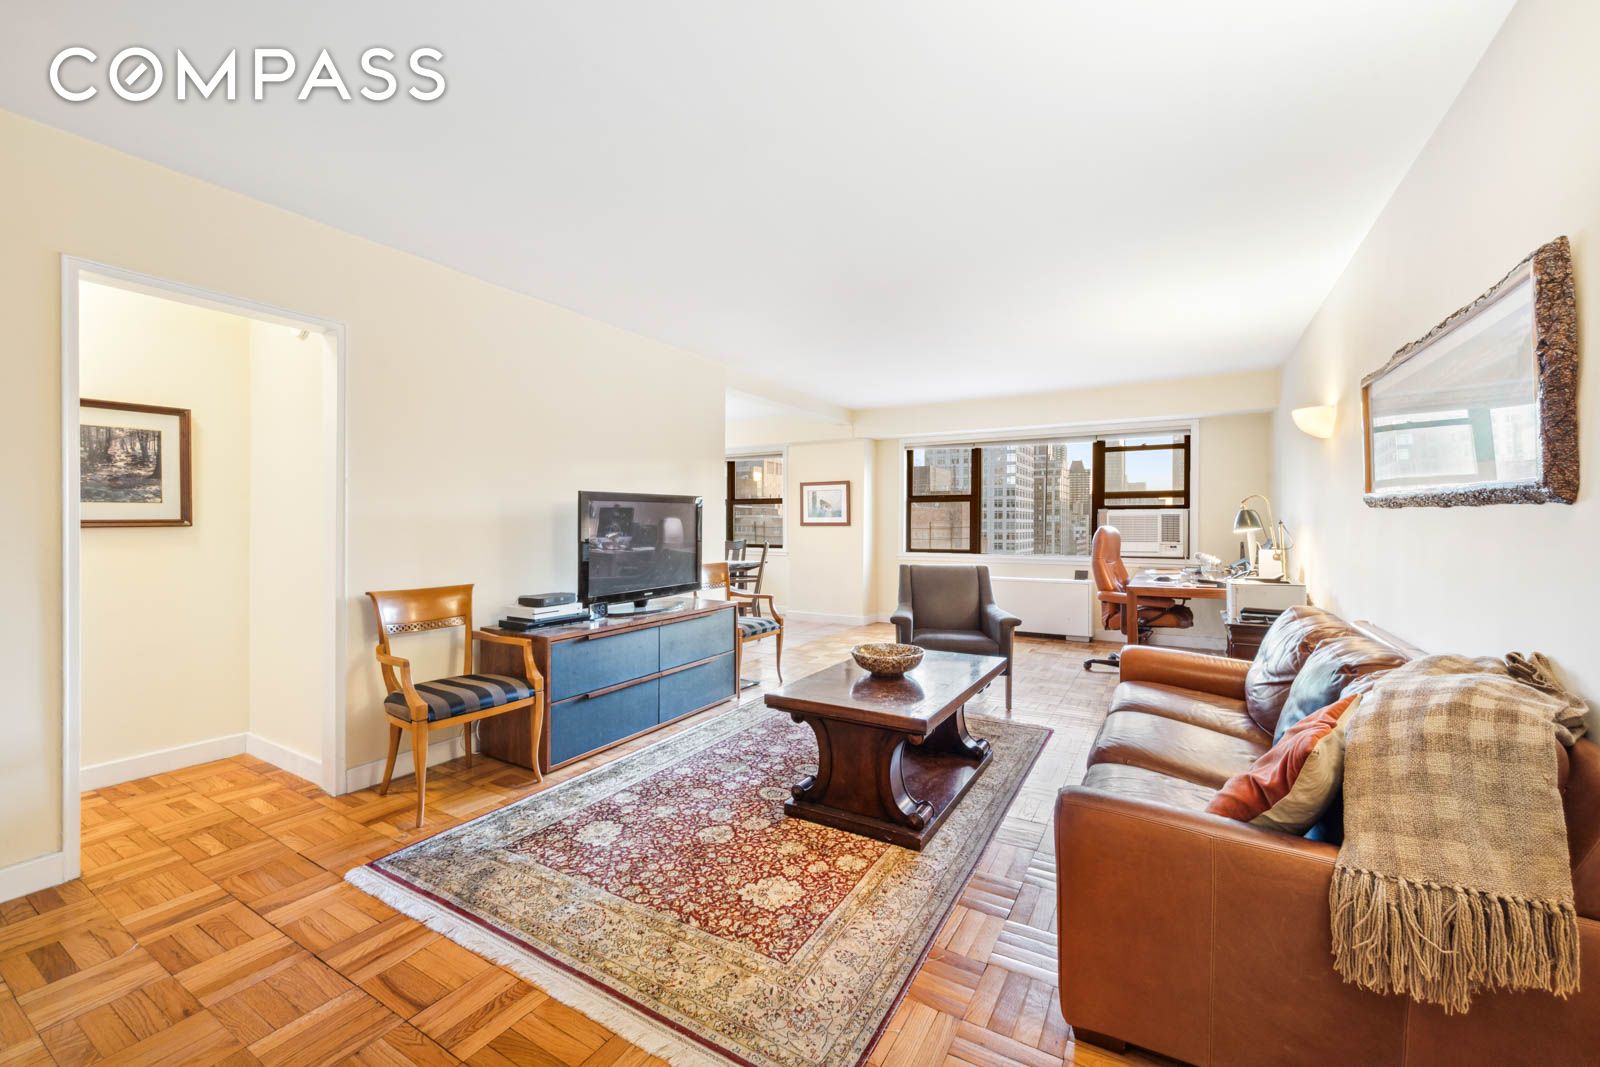 345 East 69th Street 16F, Lenox Hill, Upper East Side, NYC - 2 Bedrooms  
2 Bathrooms  
5 Rooms - 